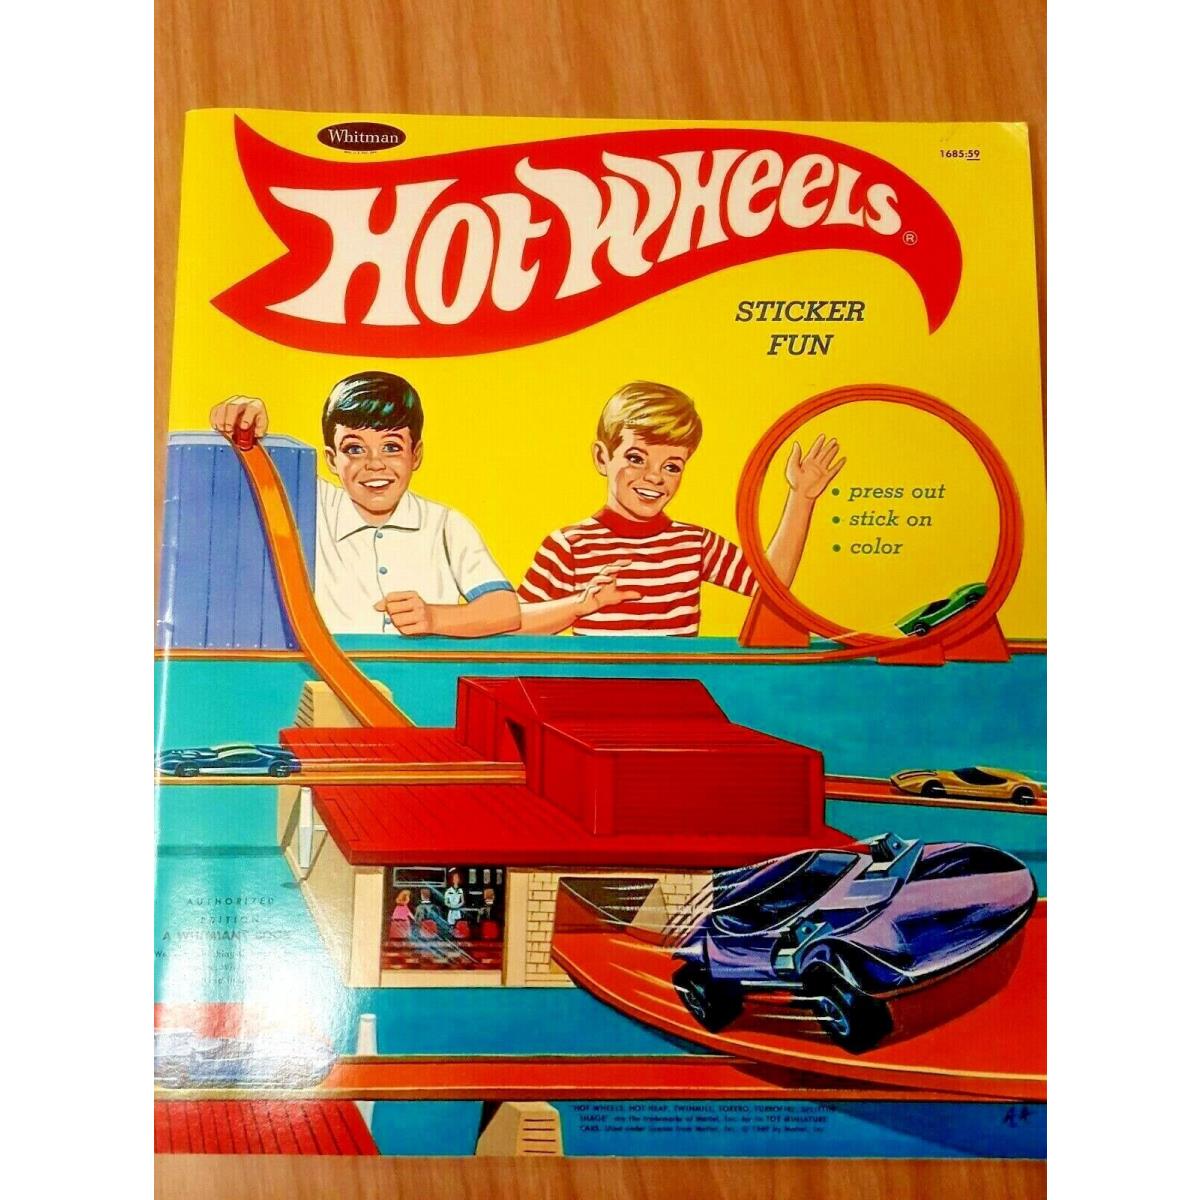 Vintage 1969 Hot Wheels Sticker Fun Book Authorized Edition BY Whitman